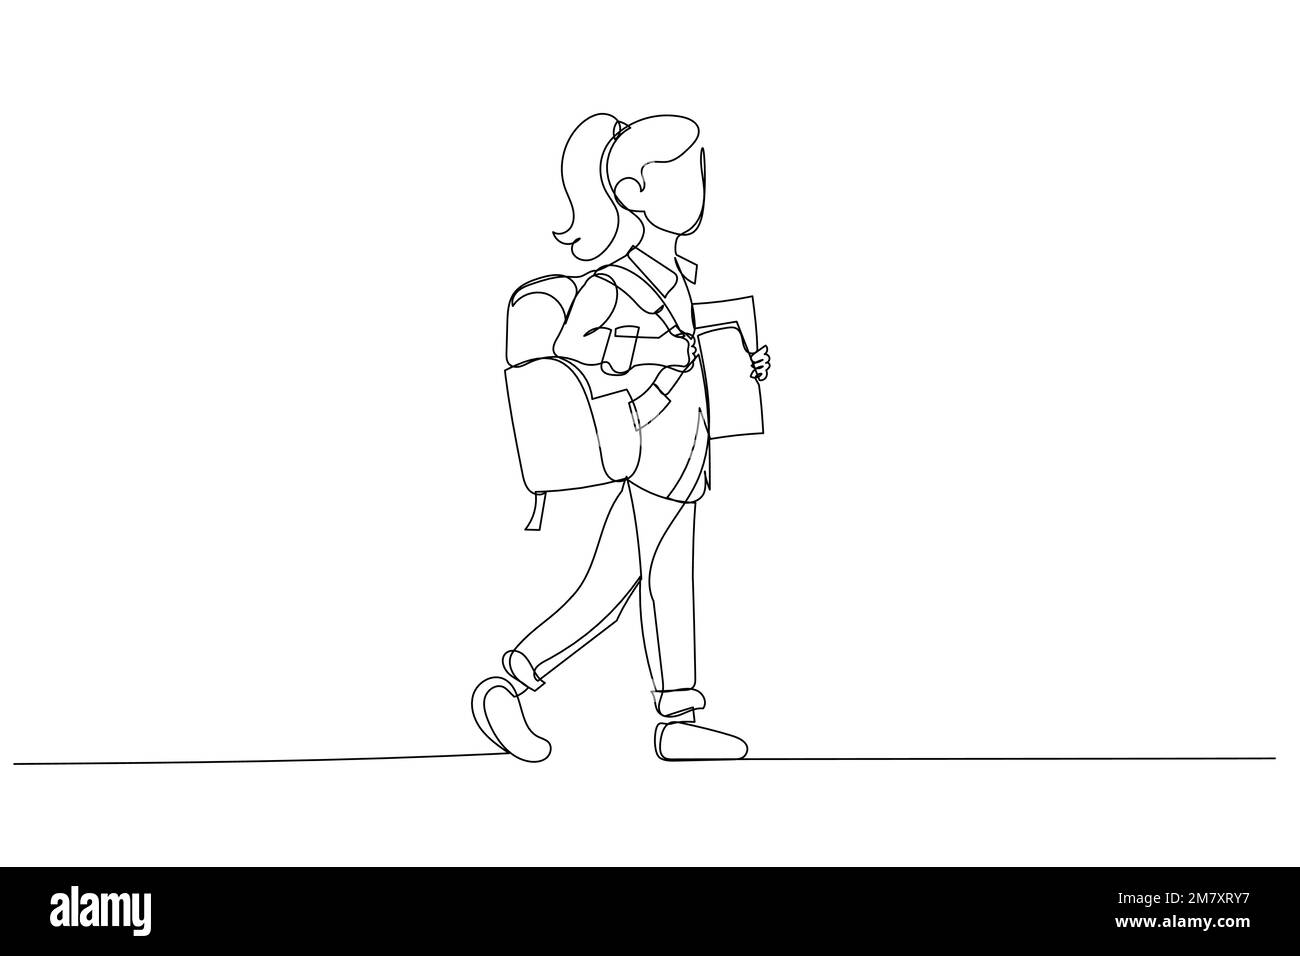 Drawing of school student holding books and backpack walking for education concept. Continuous line art Stock Vector